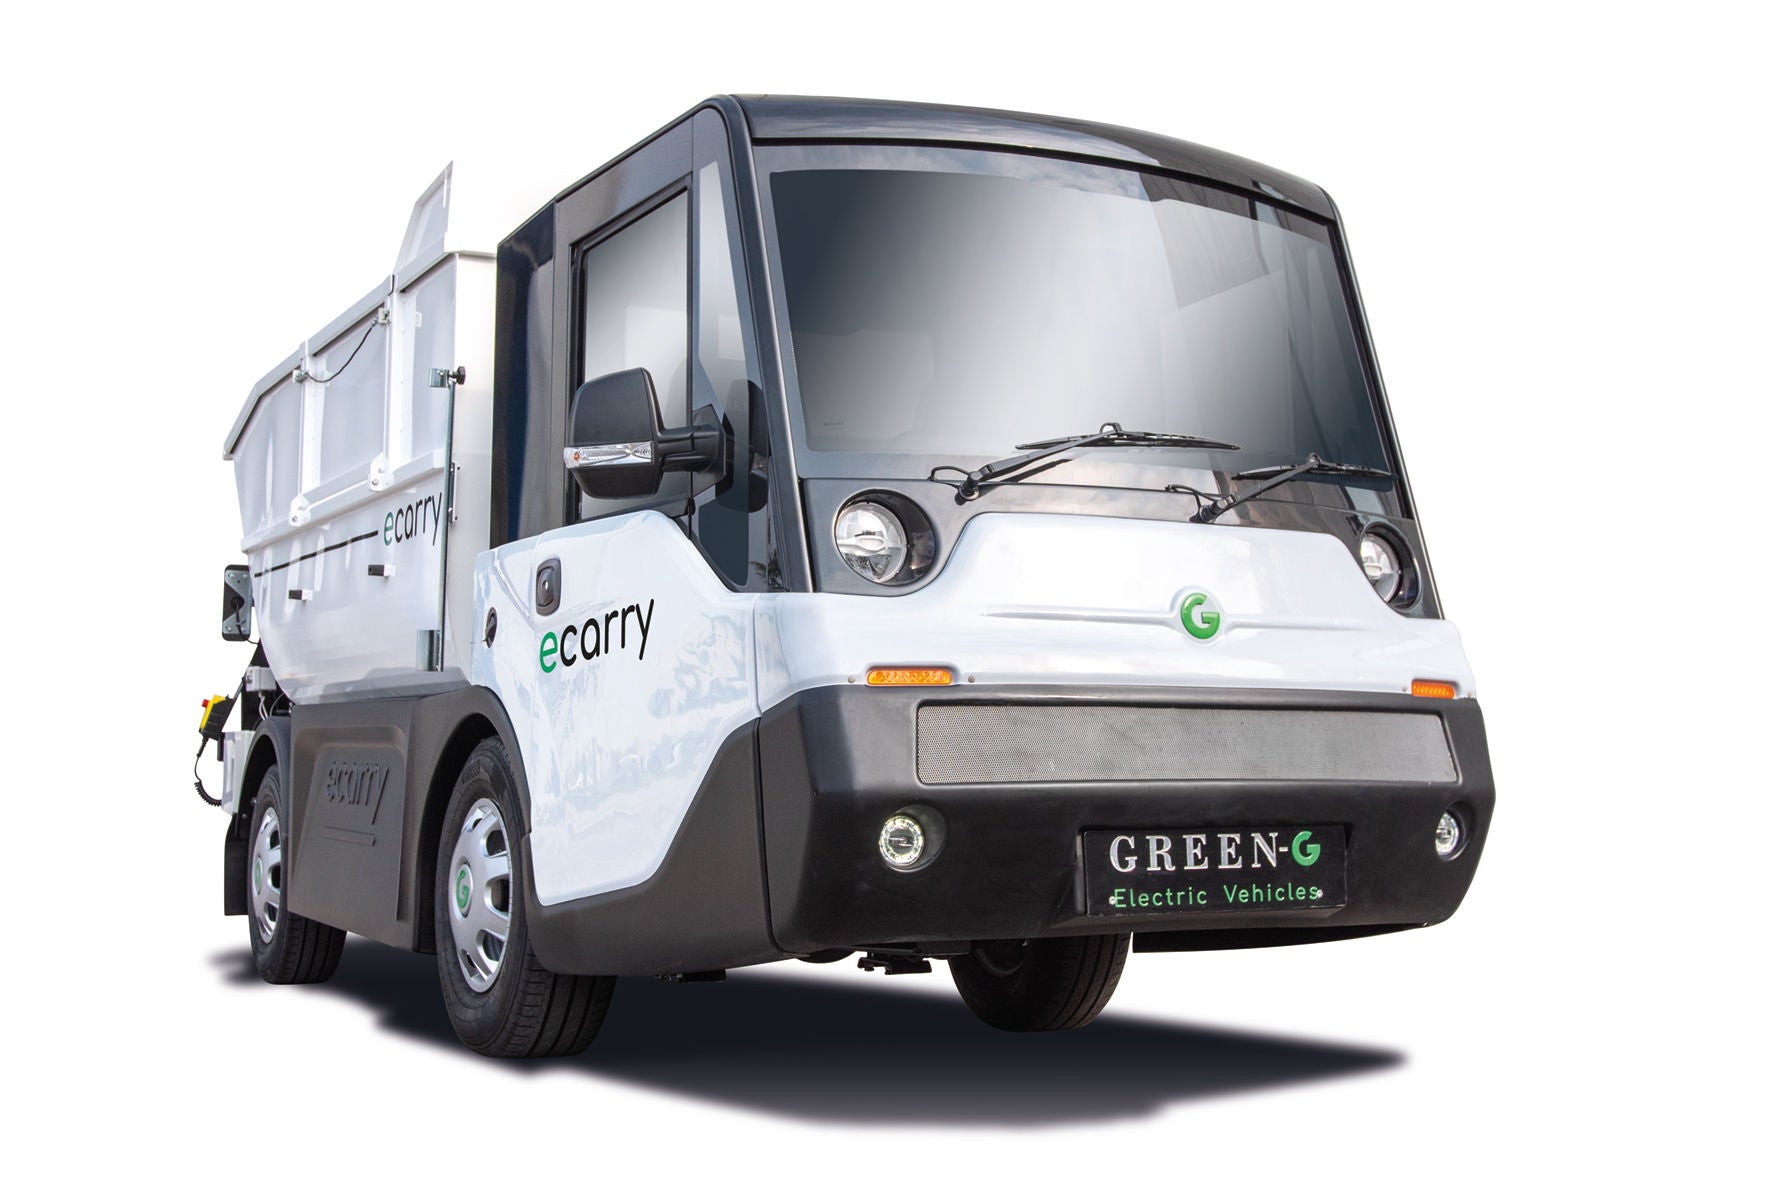 Green-G electric vehicle with zero-emission - The ecarry with Webasto Battery System